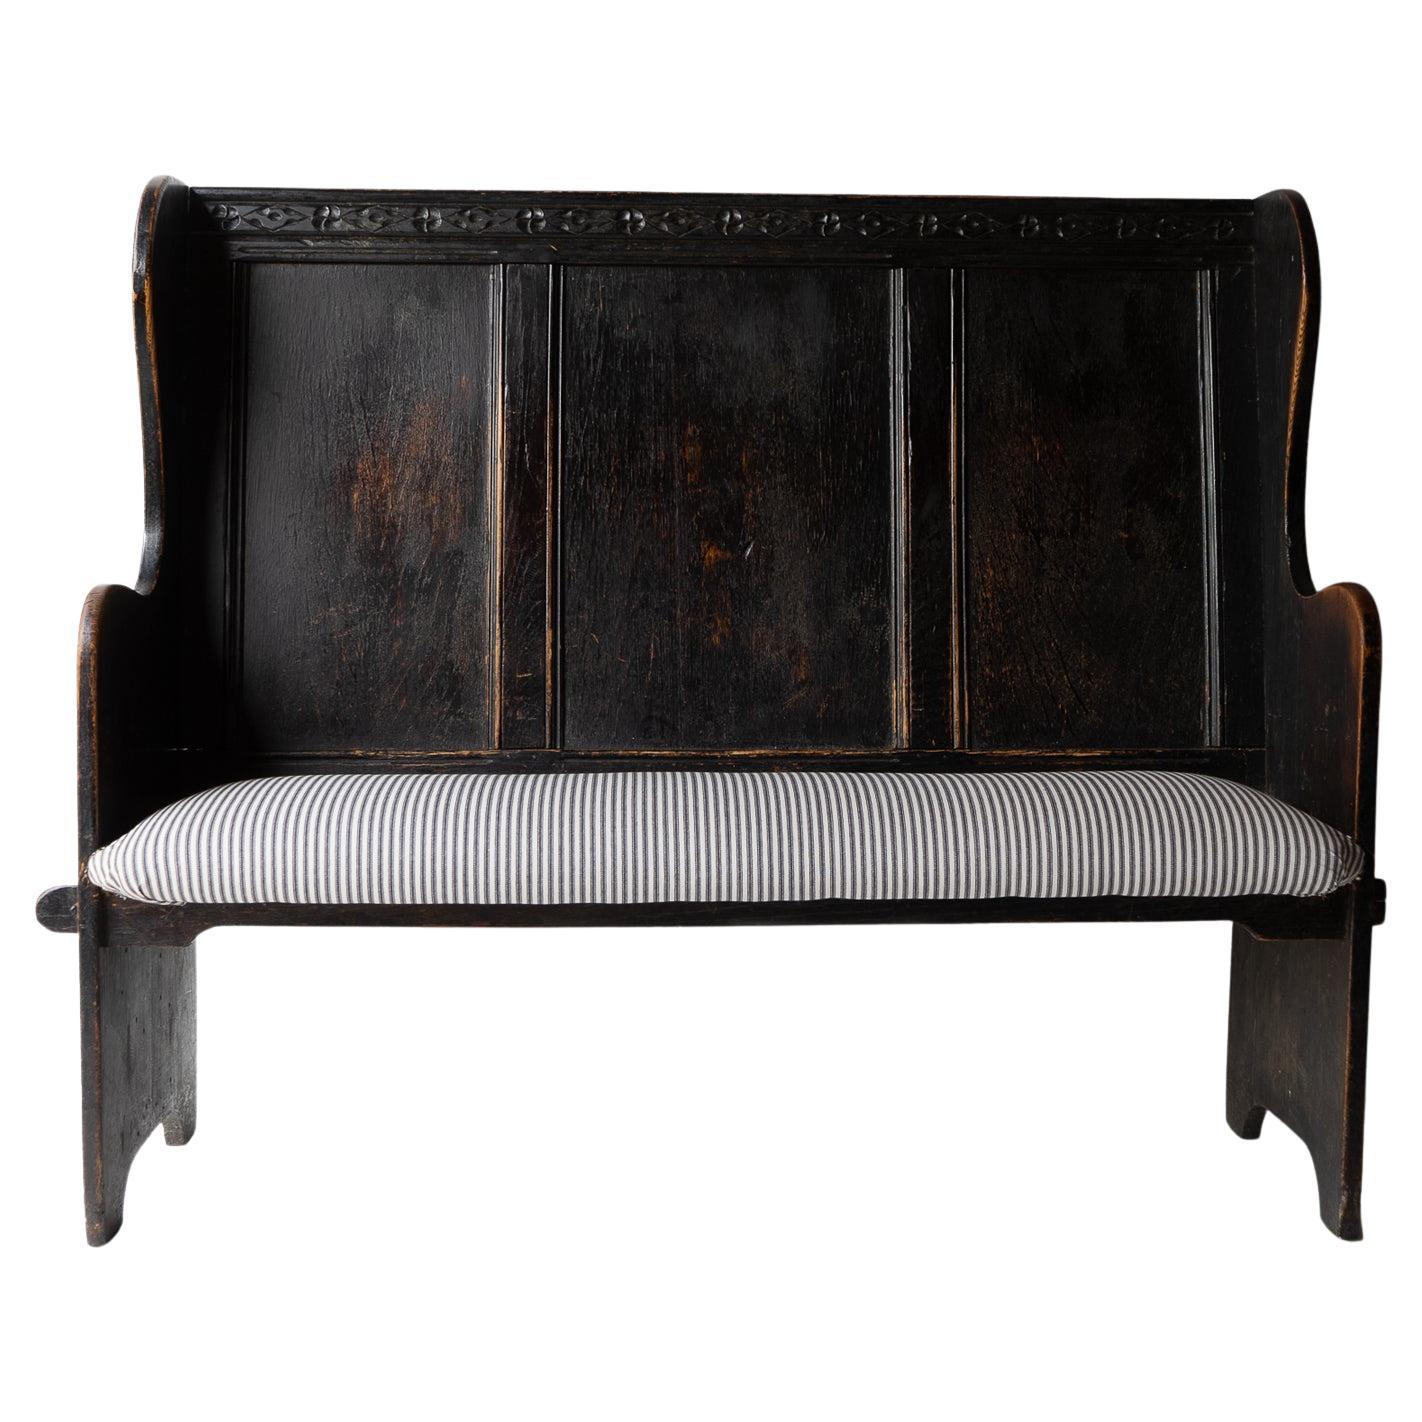 Antique Carved Ebonised Oak Settle, Bench With Upholstered Seat, 19th Century